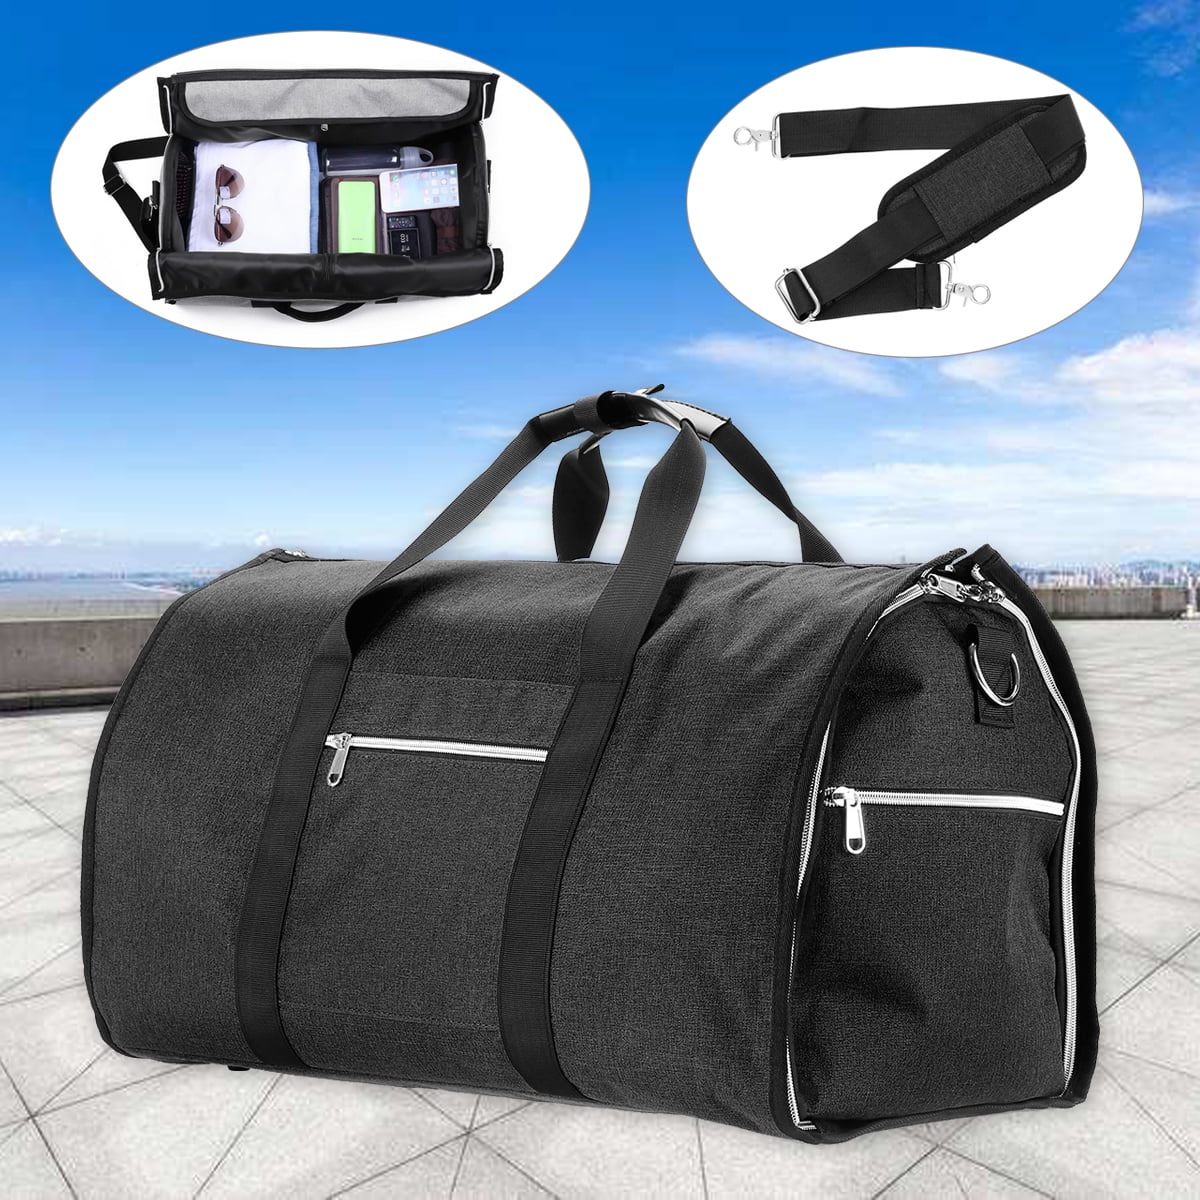 2 in 1 Foldable Duffle Bag Gym Sports Business Travel Luggage Bag Oxford Waterproof Suit Storage ...